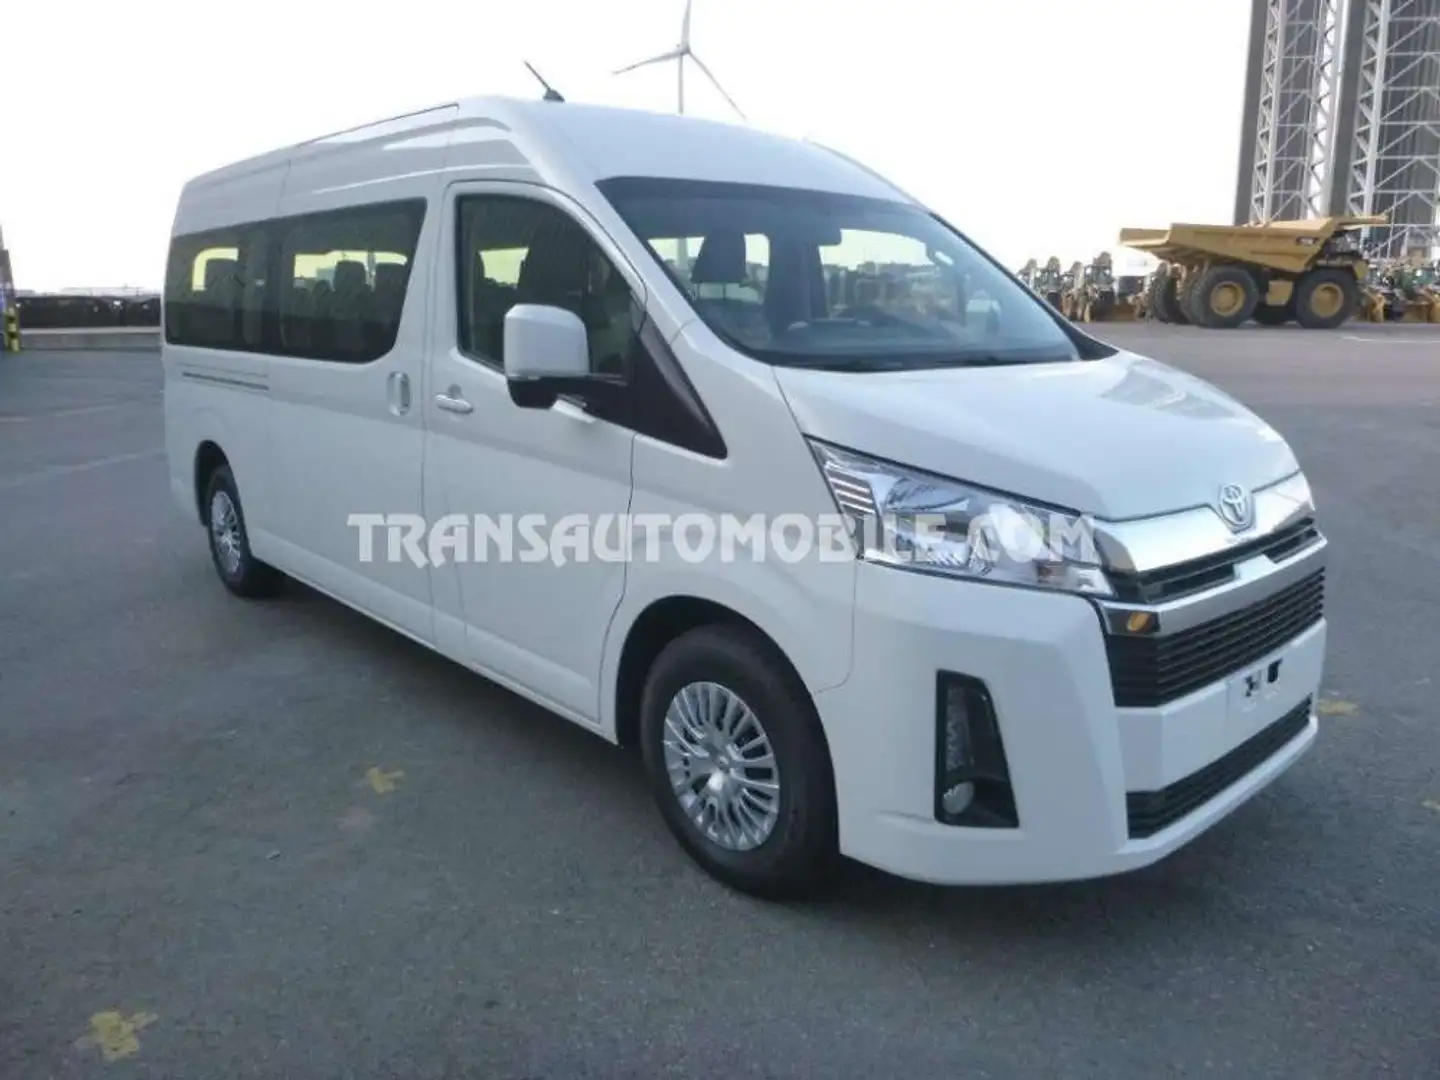 Toyota Hiace HIGH ROOF / TOIT HAUT - EXPORT OUT EU TROPICAL VER White - 1